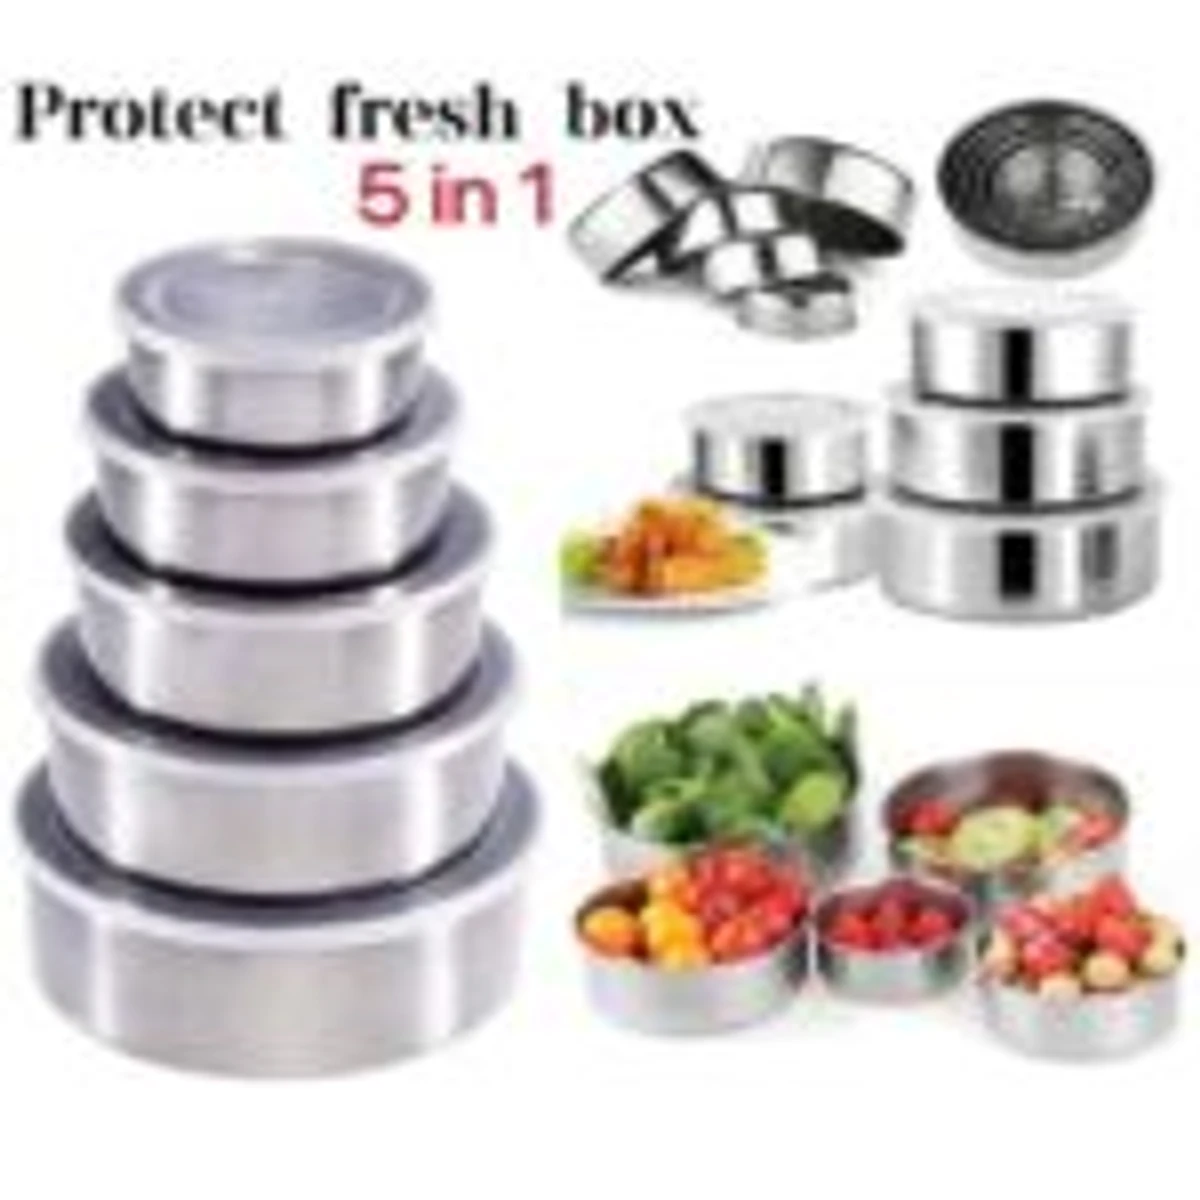 Stainless Steel Food box